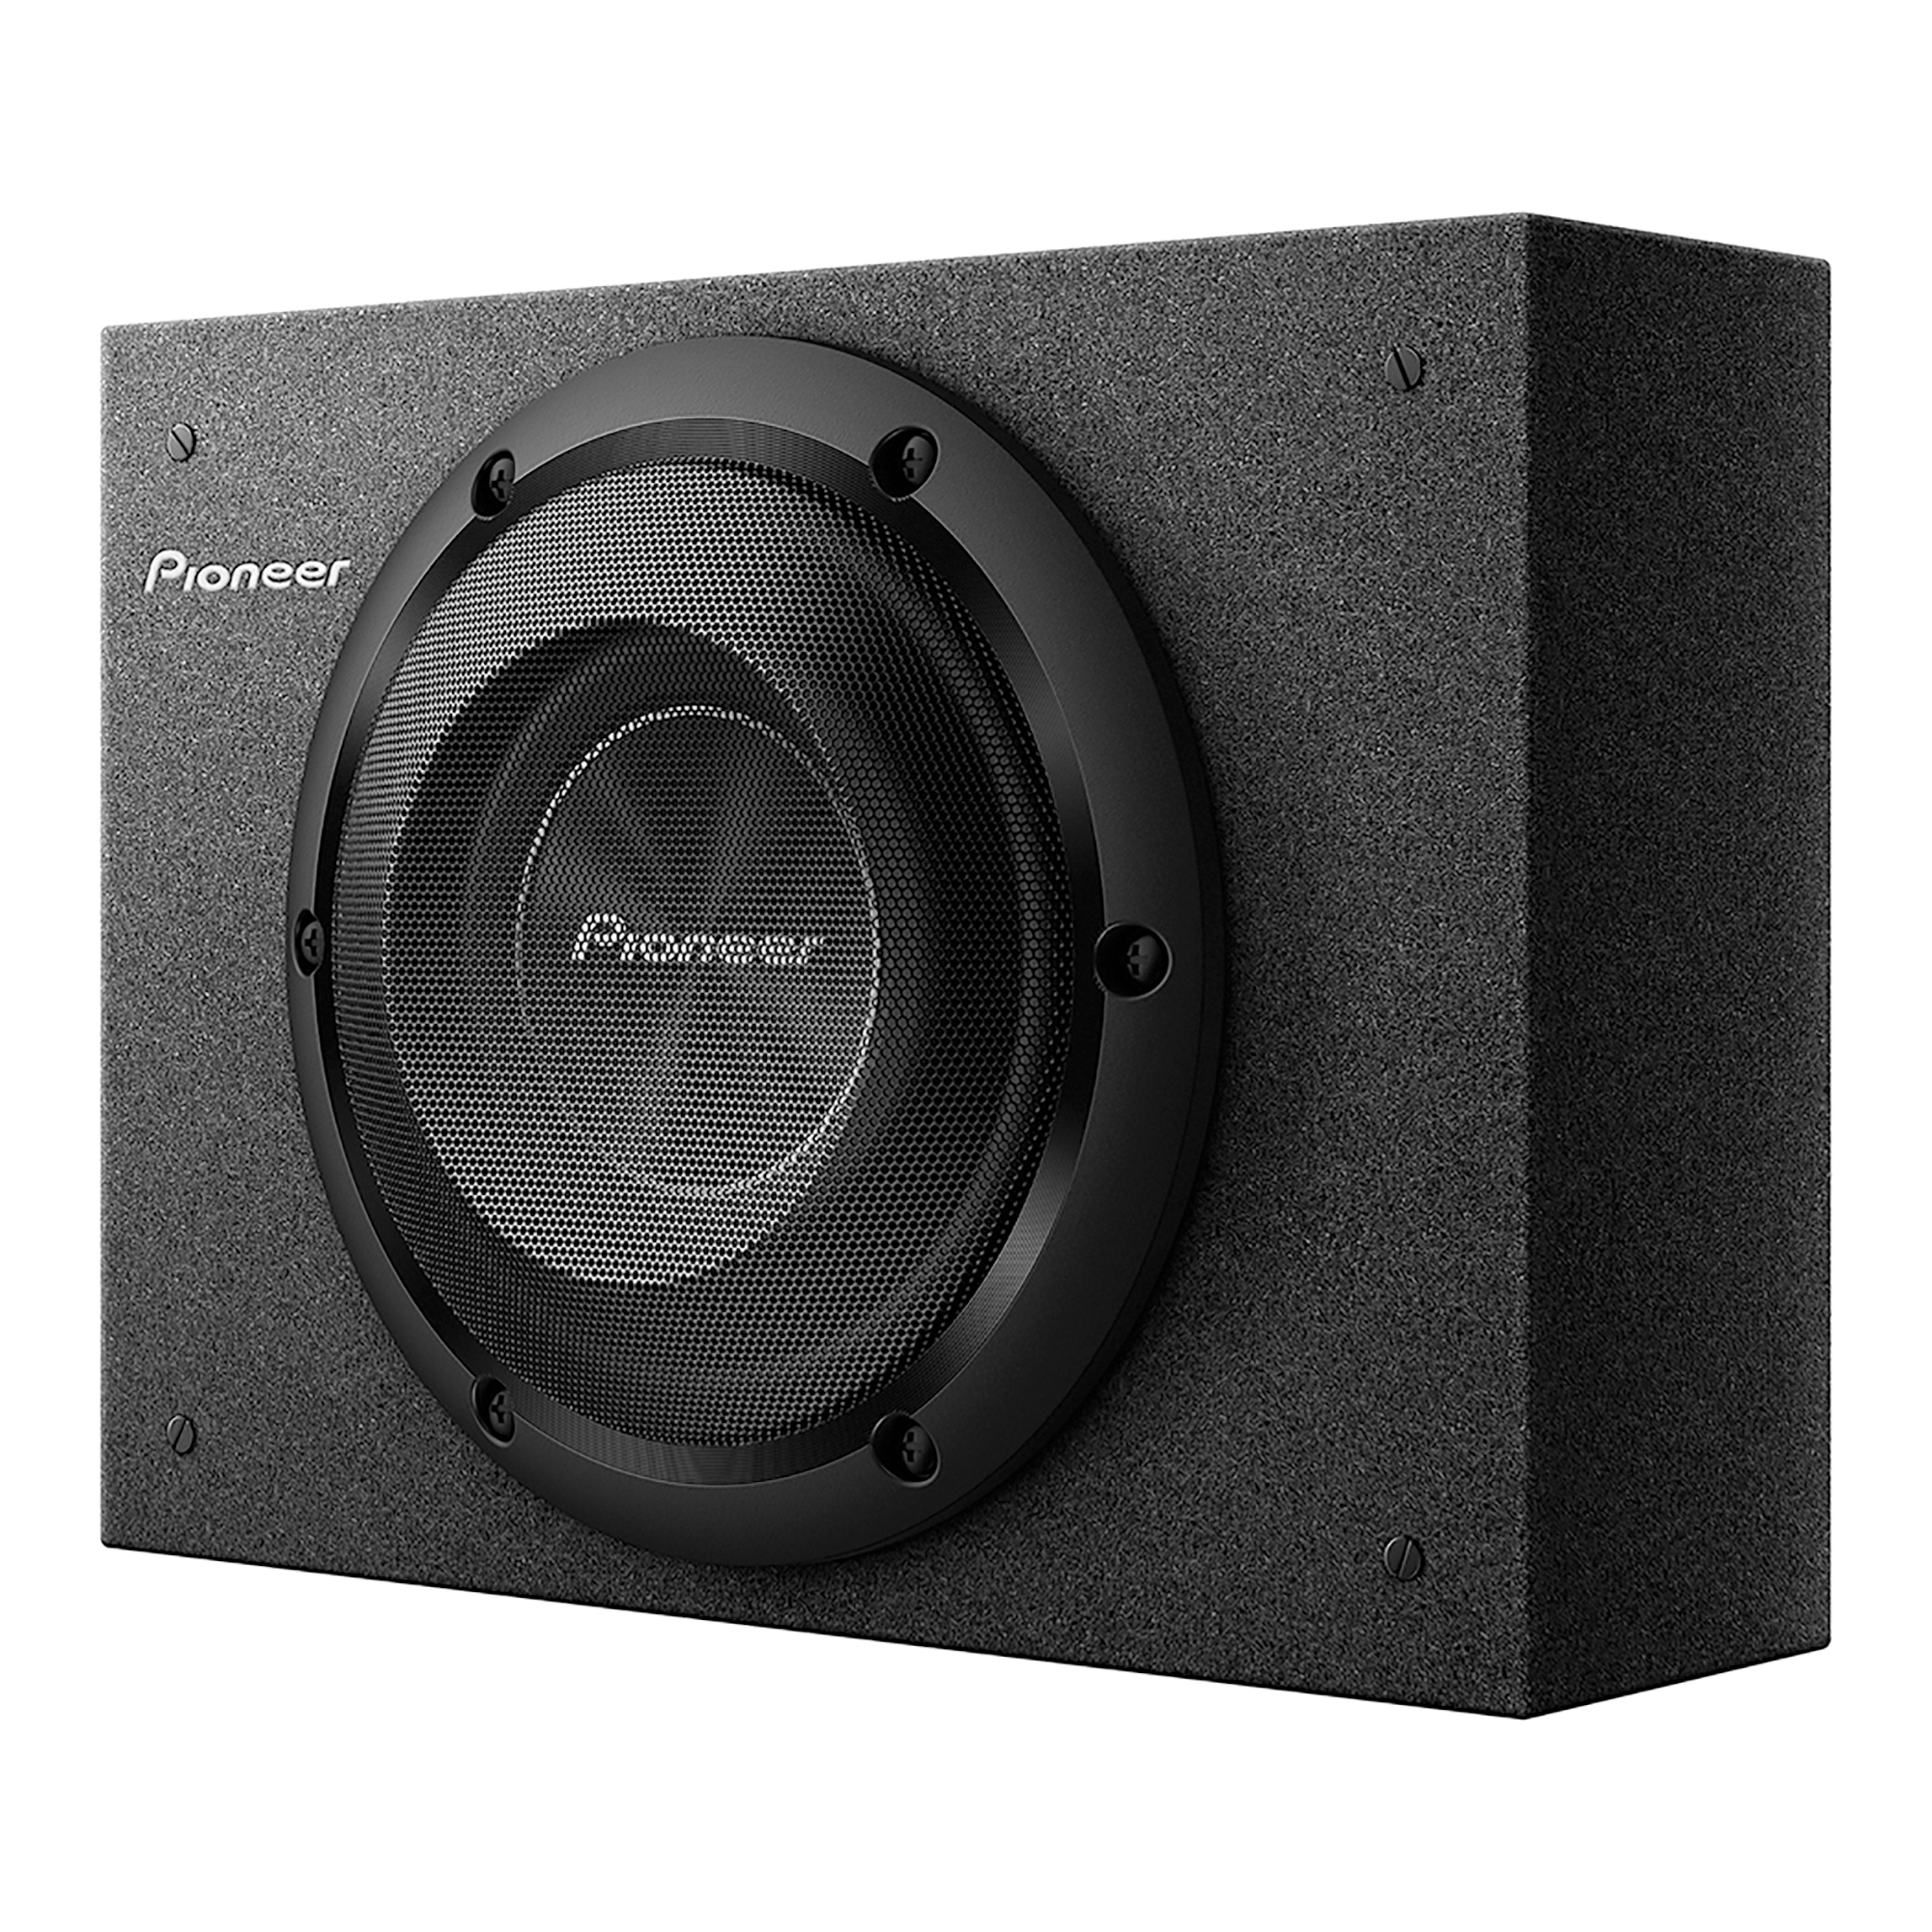 Pioneer A-Series, Shallow-Mount Pre-Loaded Enclosure with Subwoofer, Model TS-A2000LB